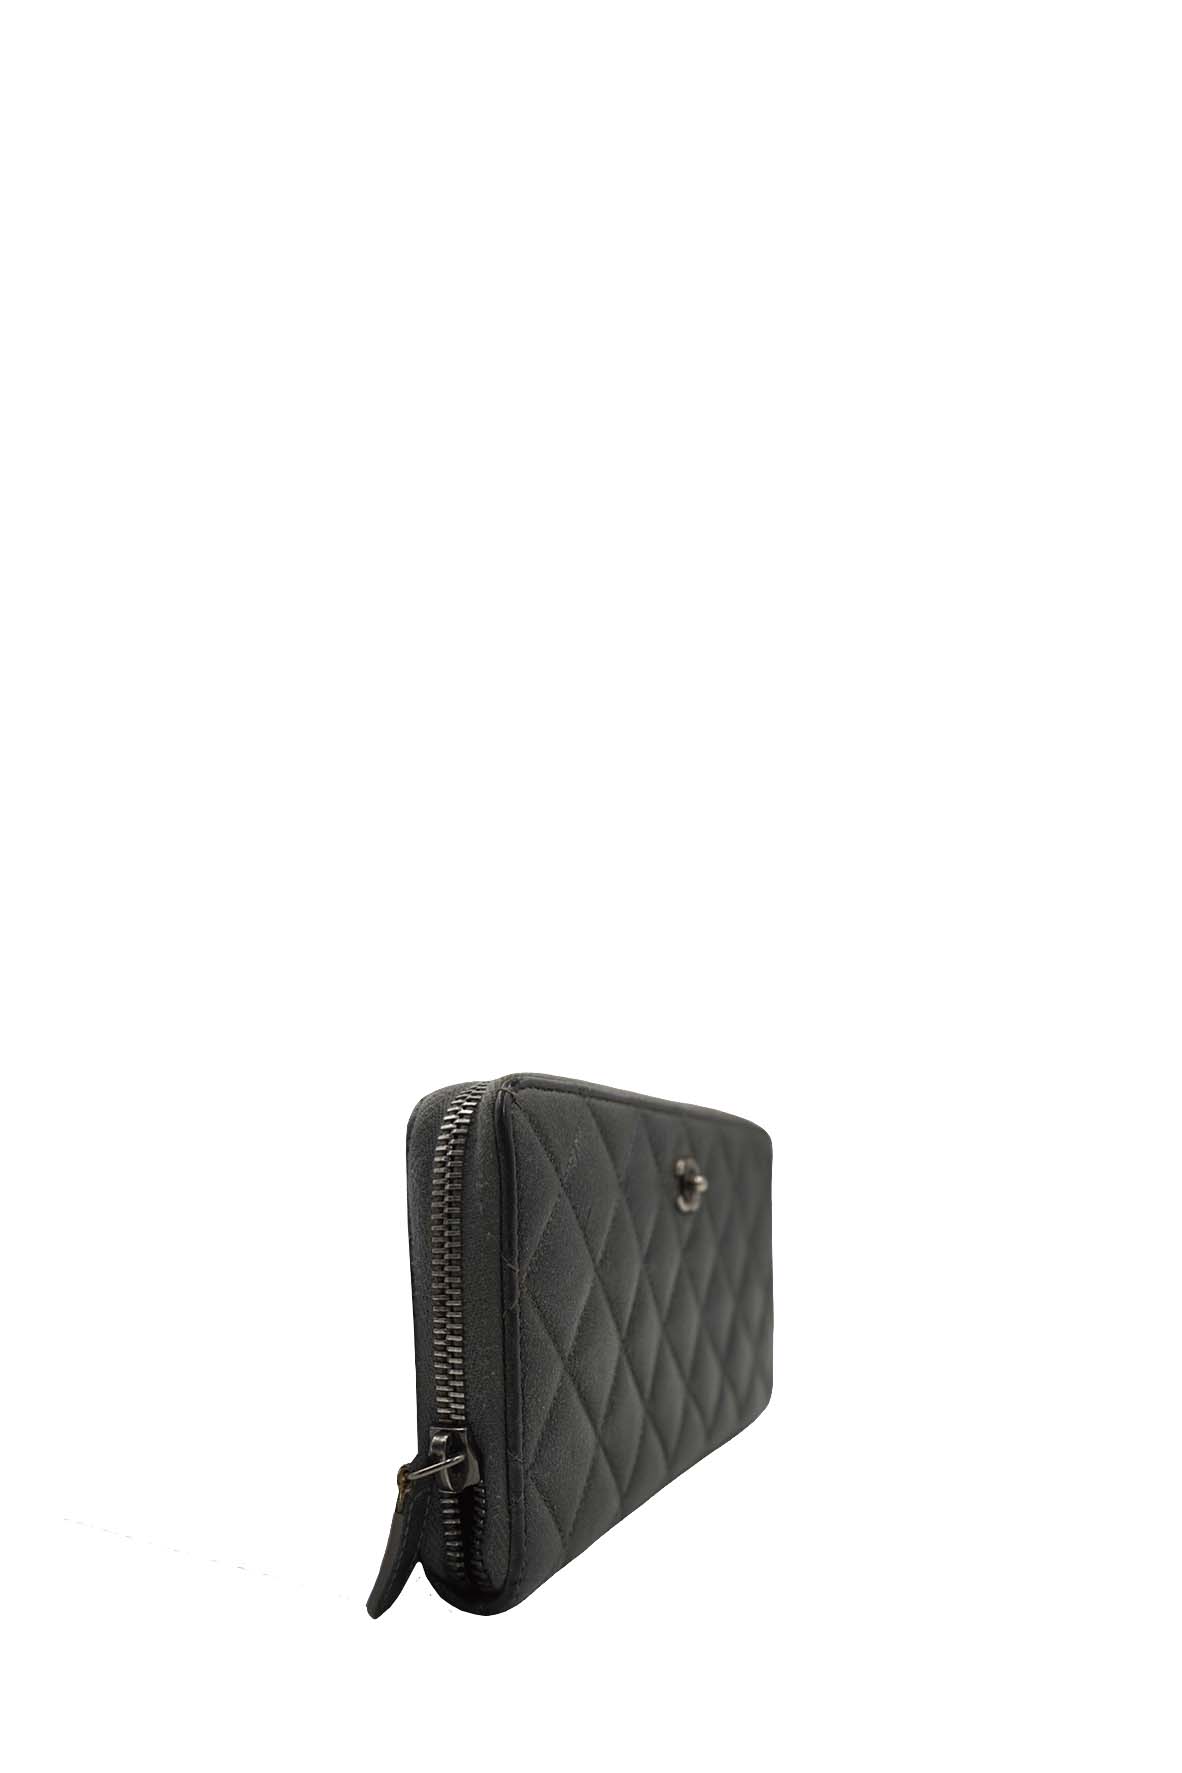 Chanel caviar quilted classic zip boy Pouch